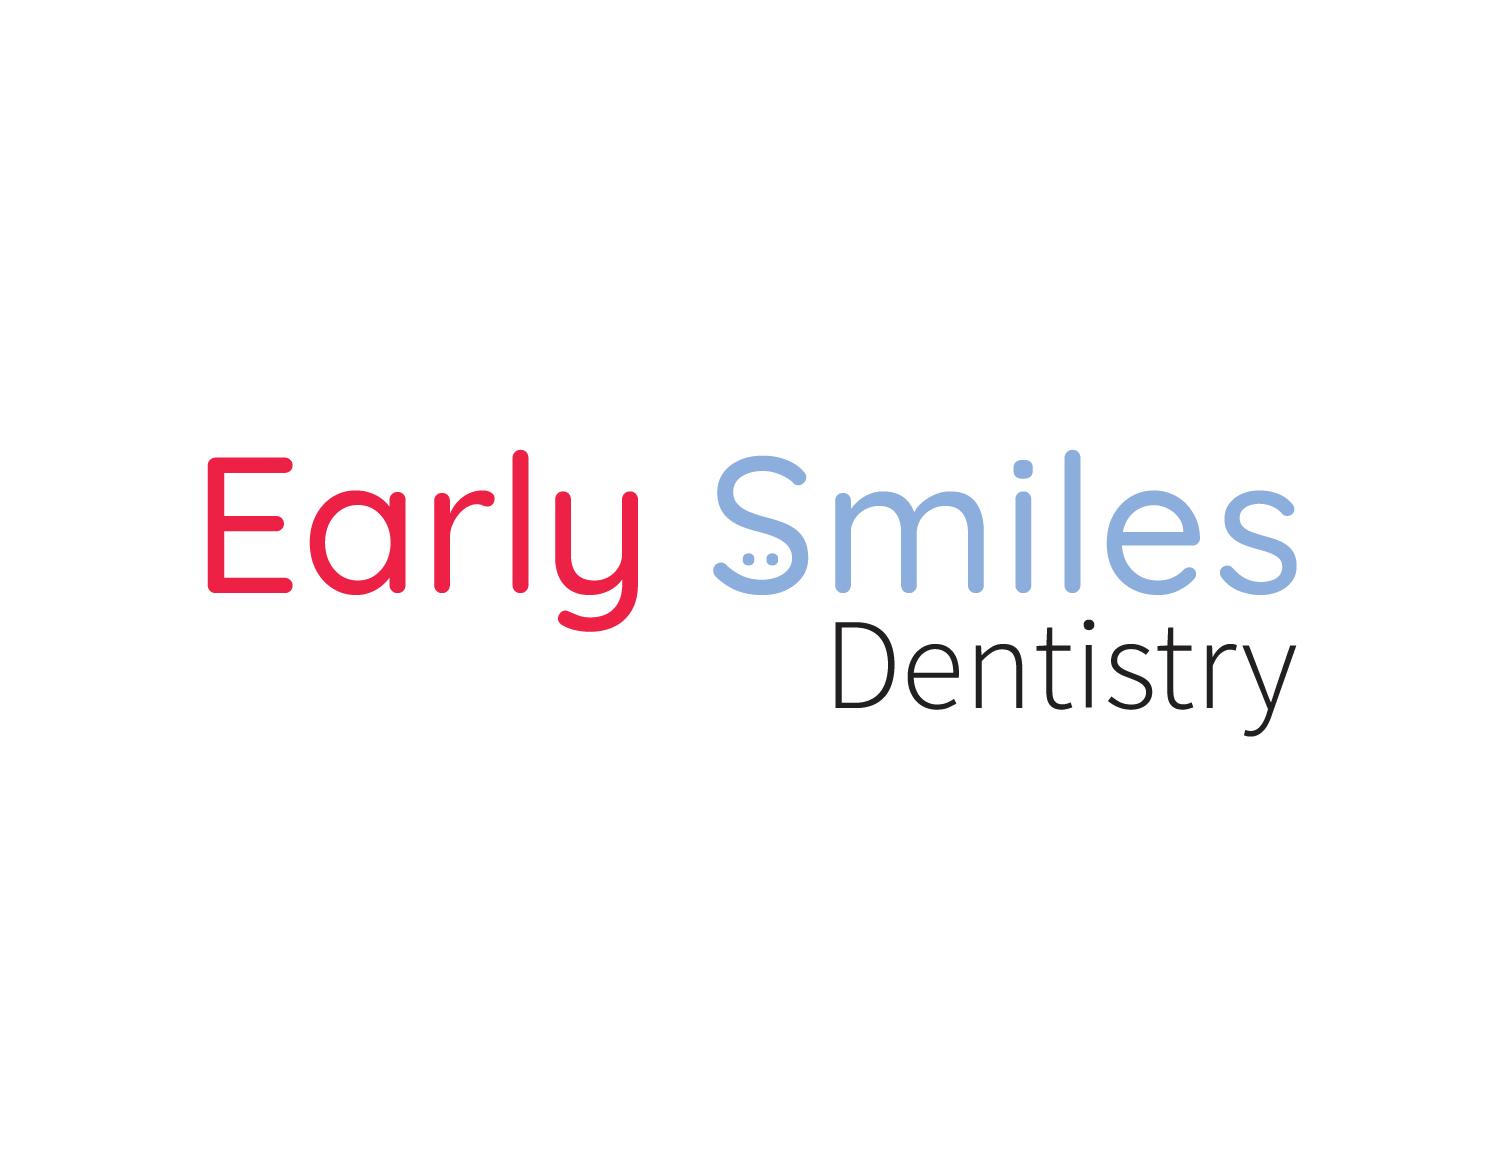 This all-Text
				logo showcases the words Early Smiles Dentistry. Early Smiles is in a
				more rounded sans serif font compared to the black font dentistry uses.
				The color of the word Early is red, while Smiles uses a dull blue color.
				In addition, the S in smiles has a smile within it.